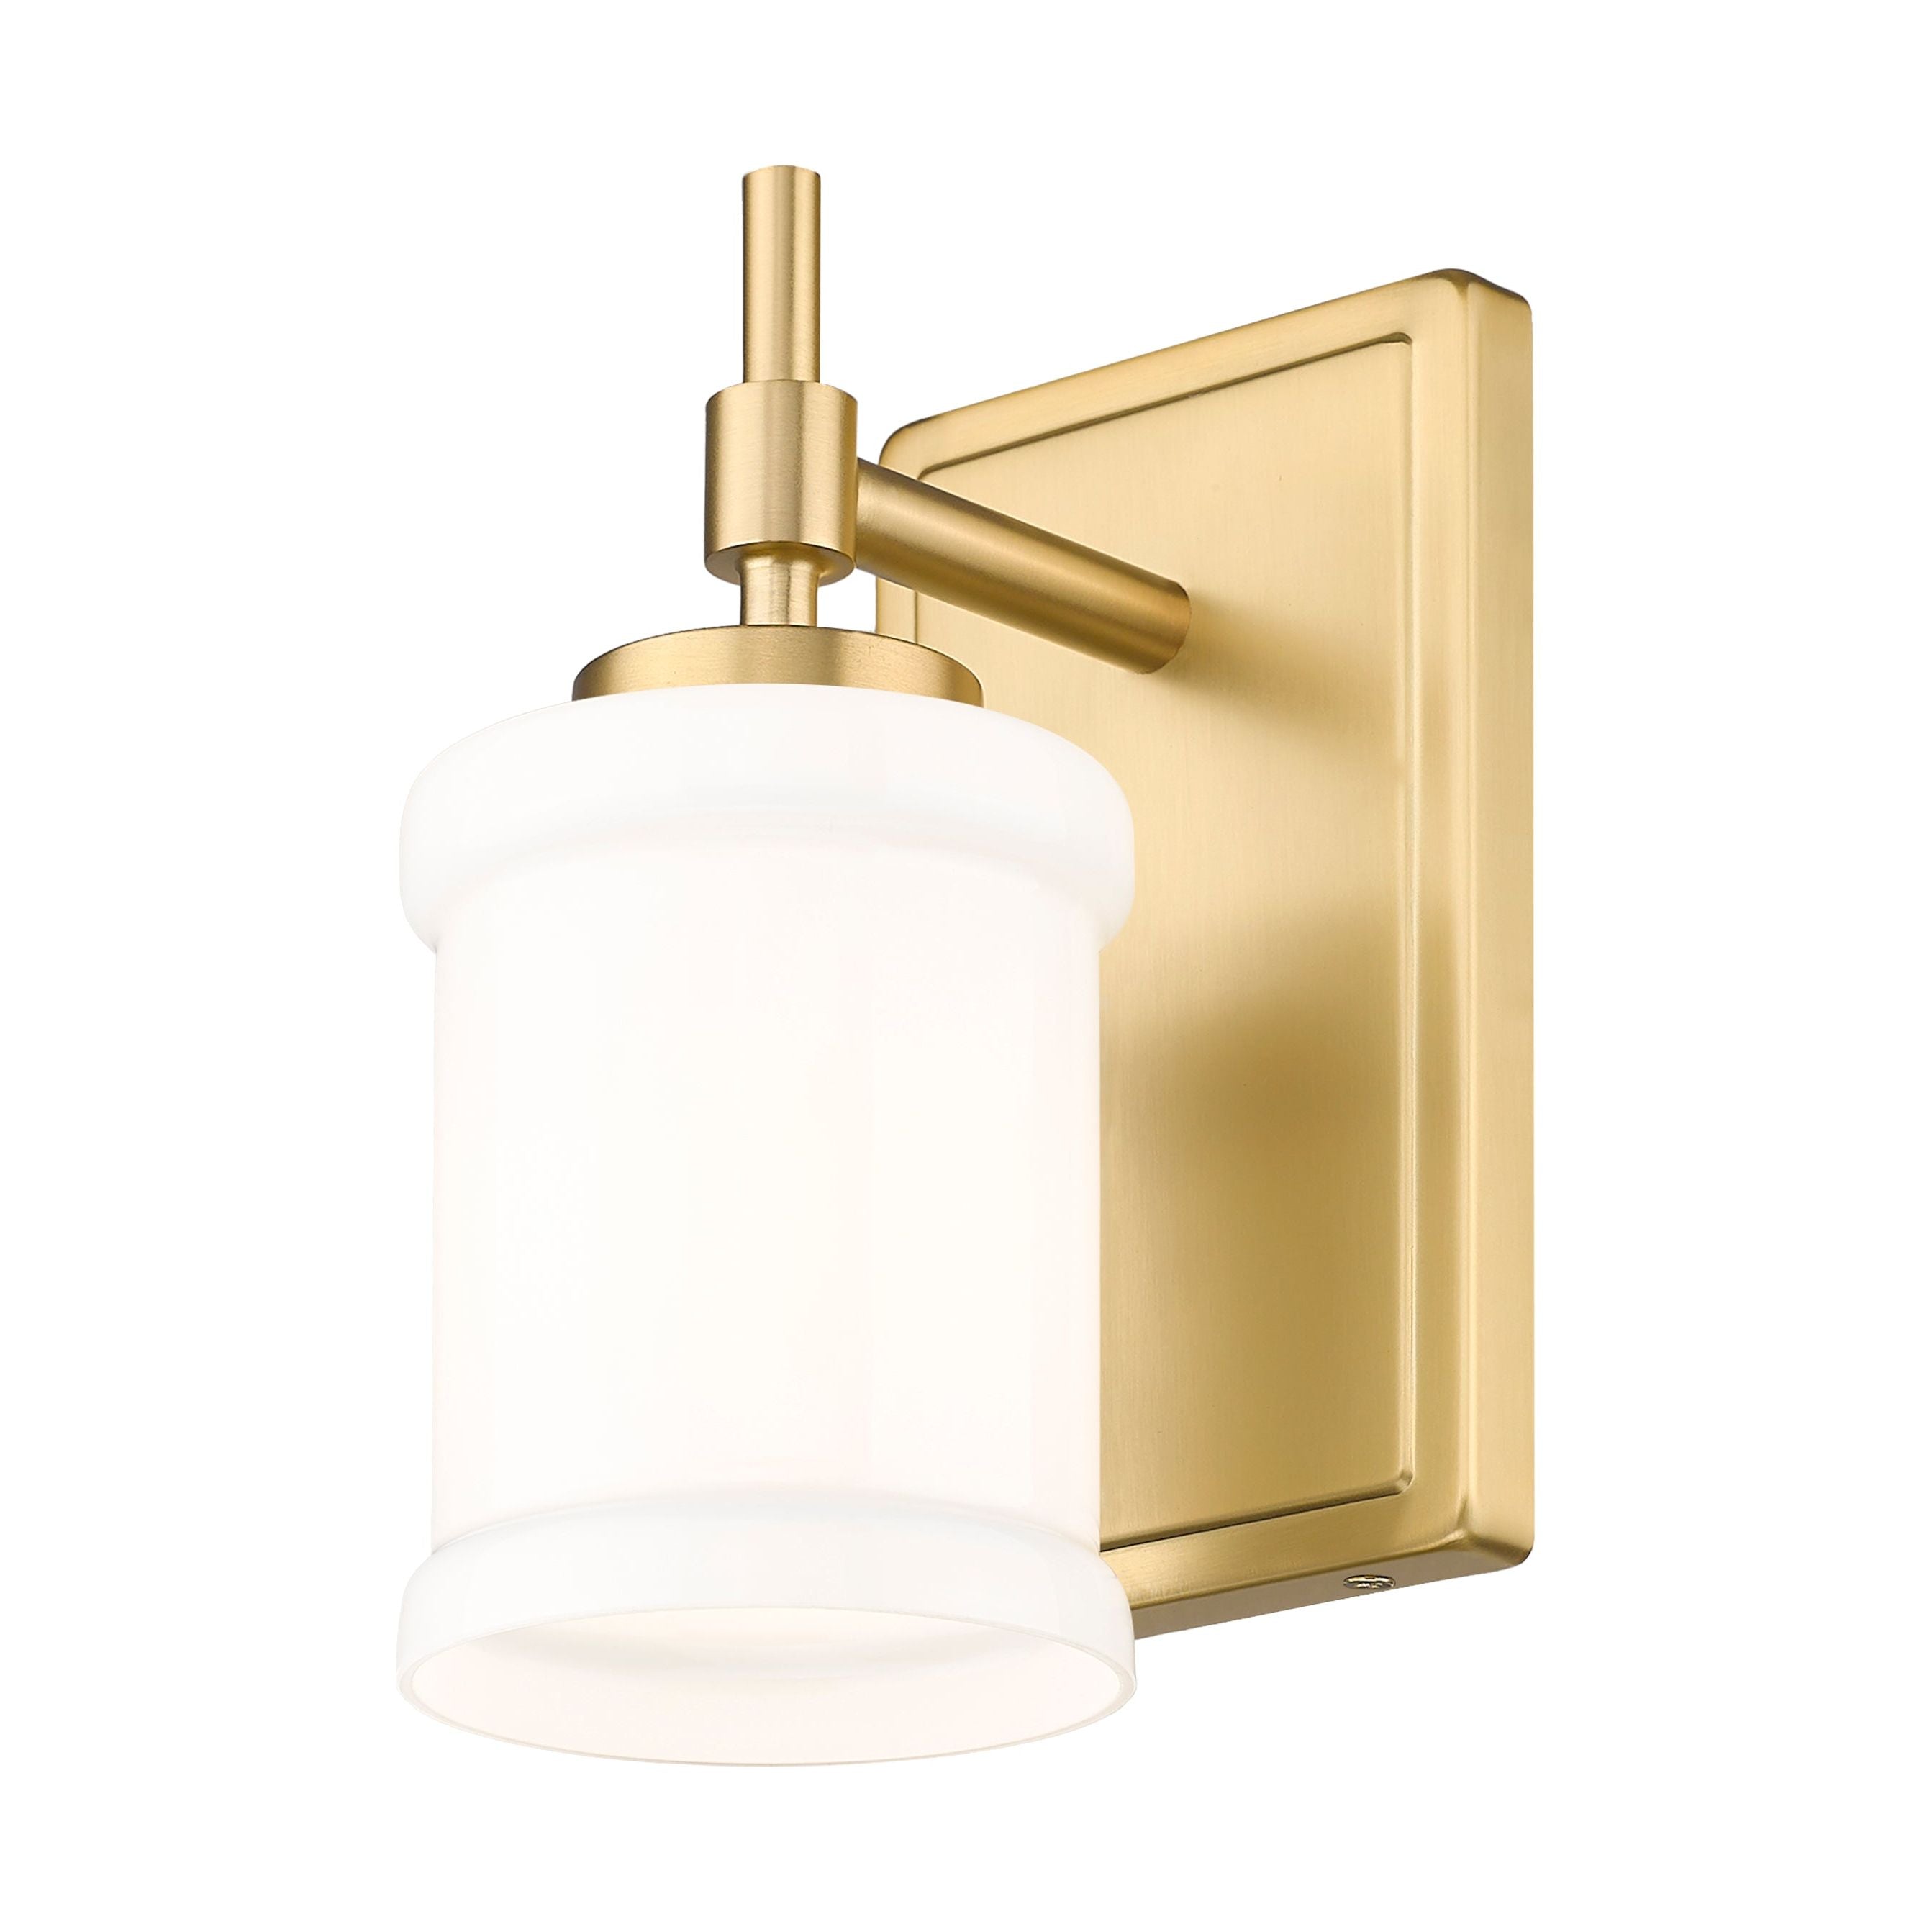 Cadoc 1-Light Wall Sconce